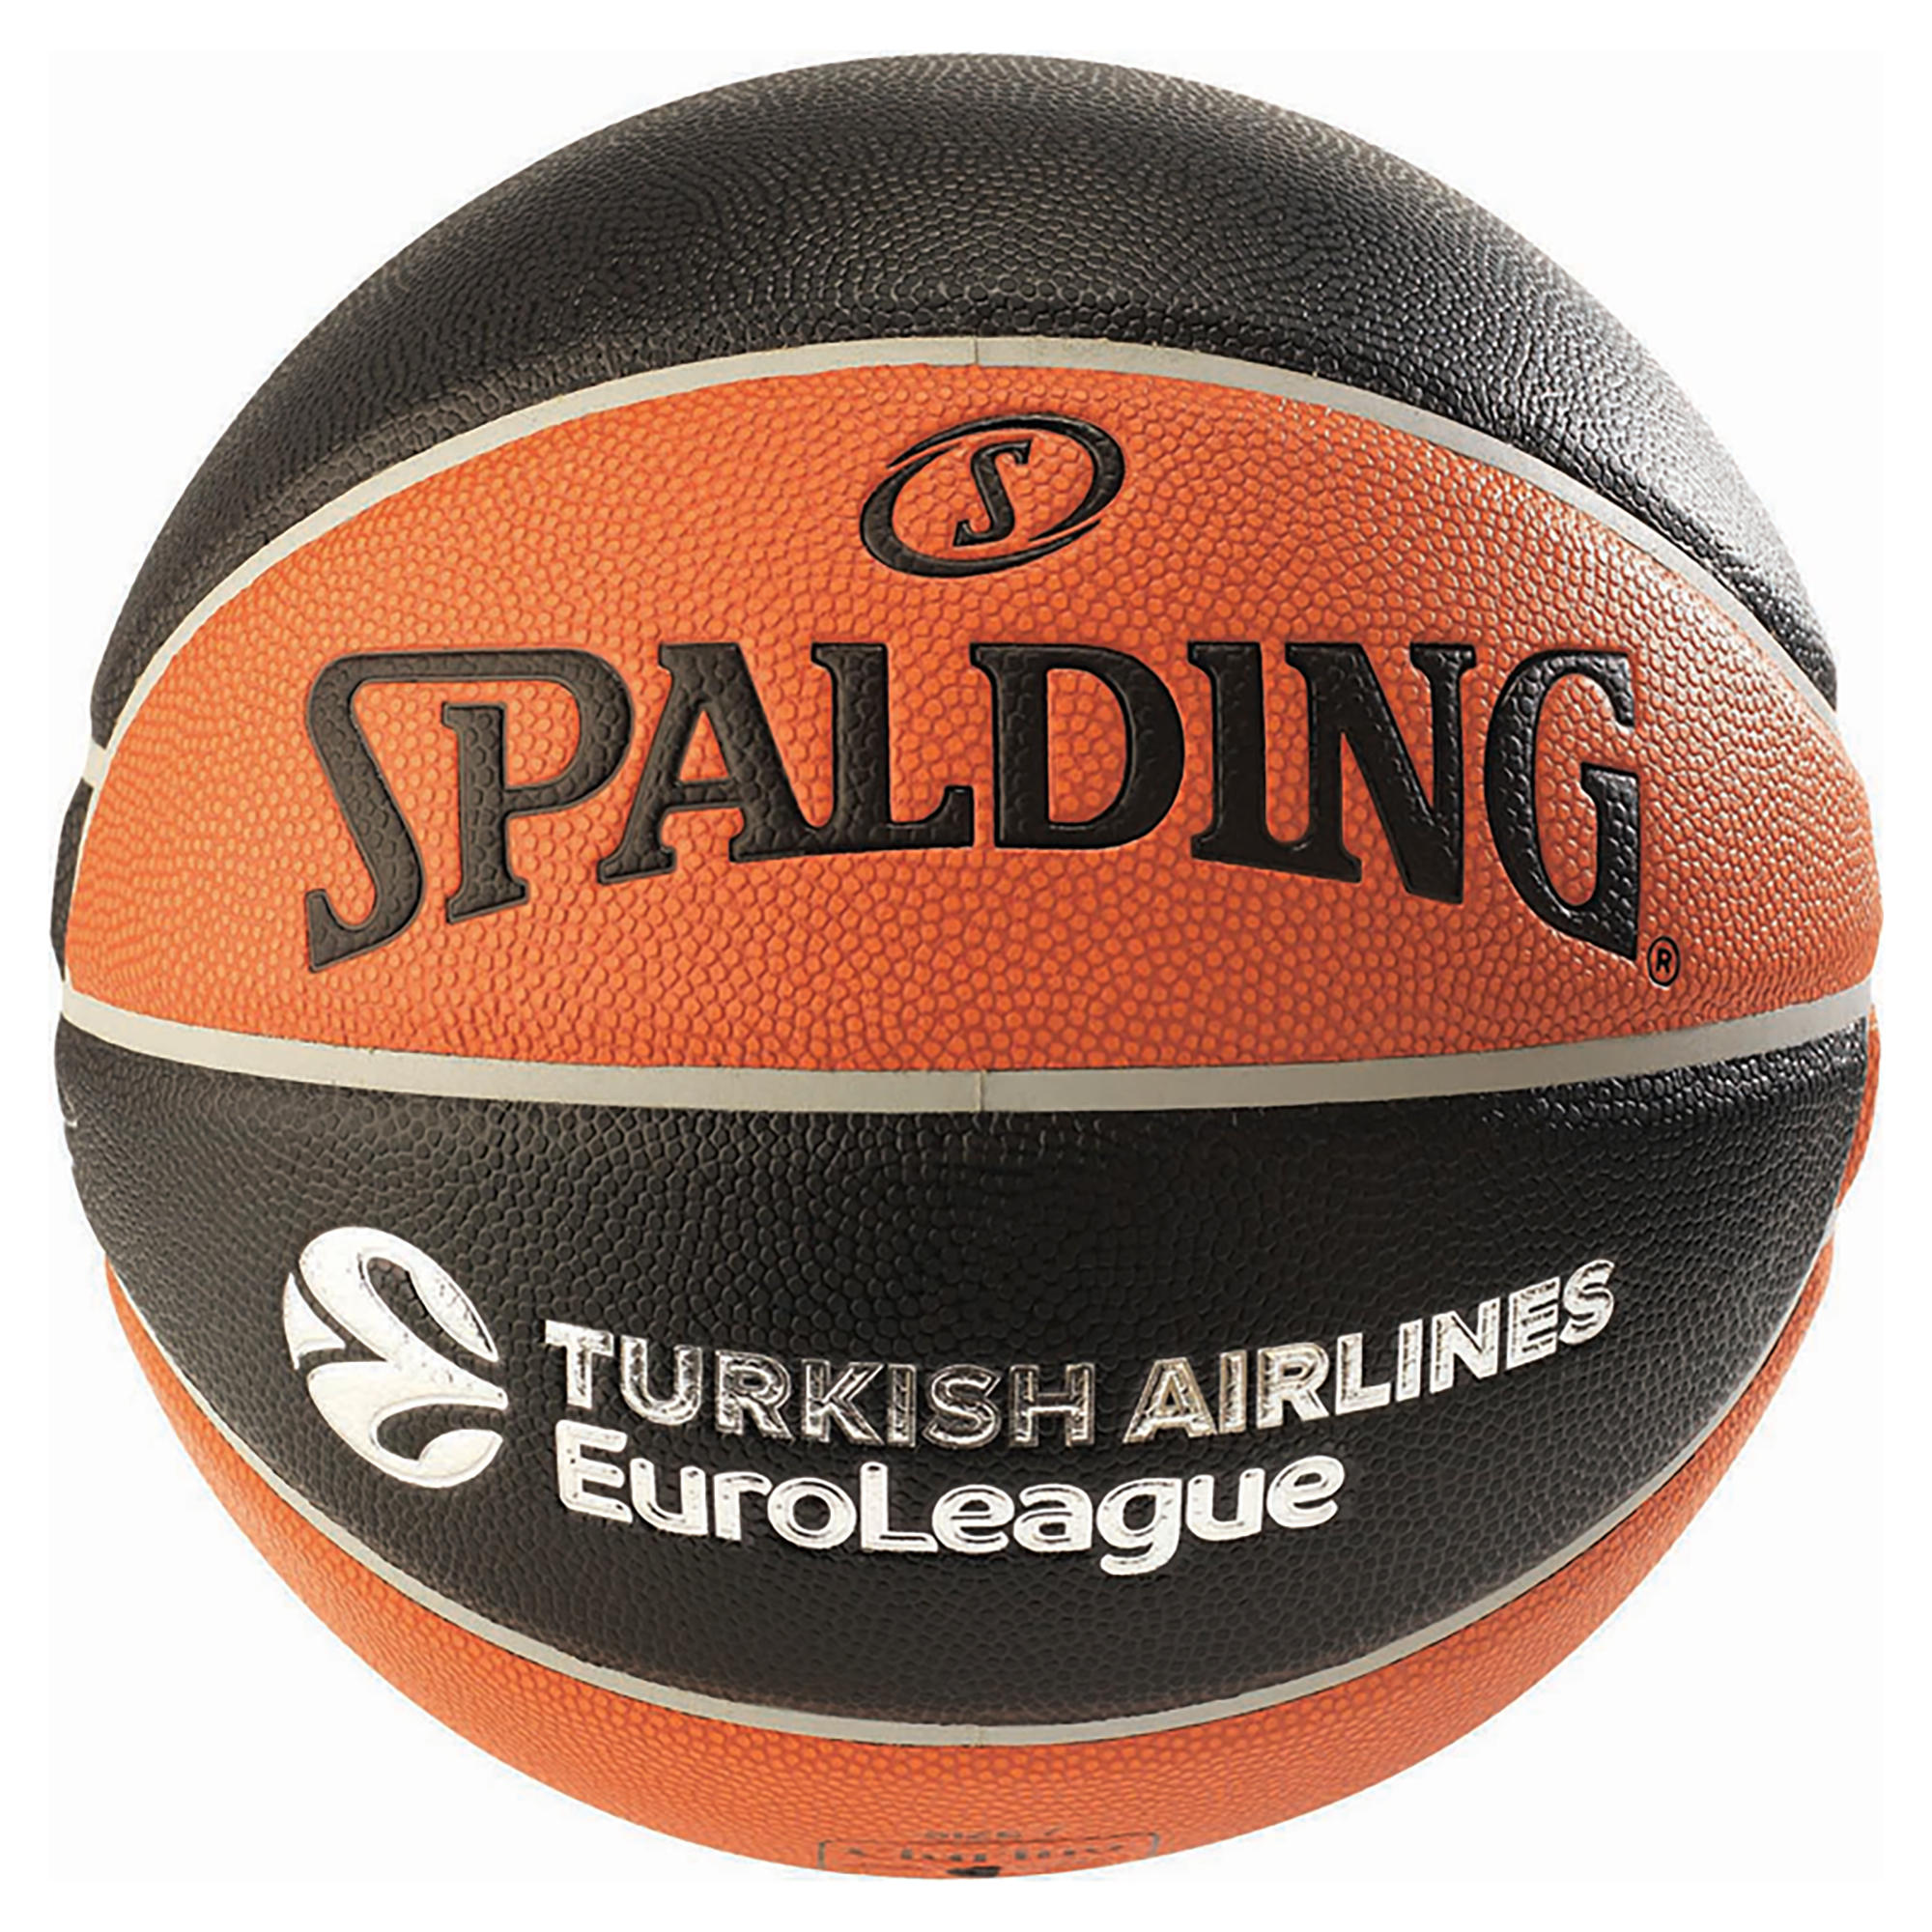 Euroleague : Spalding Euroleague Tf500 Legacy In Out Basketball Spalding Indoortrends De - Official turkish airlines euroleague twitter page.